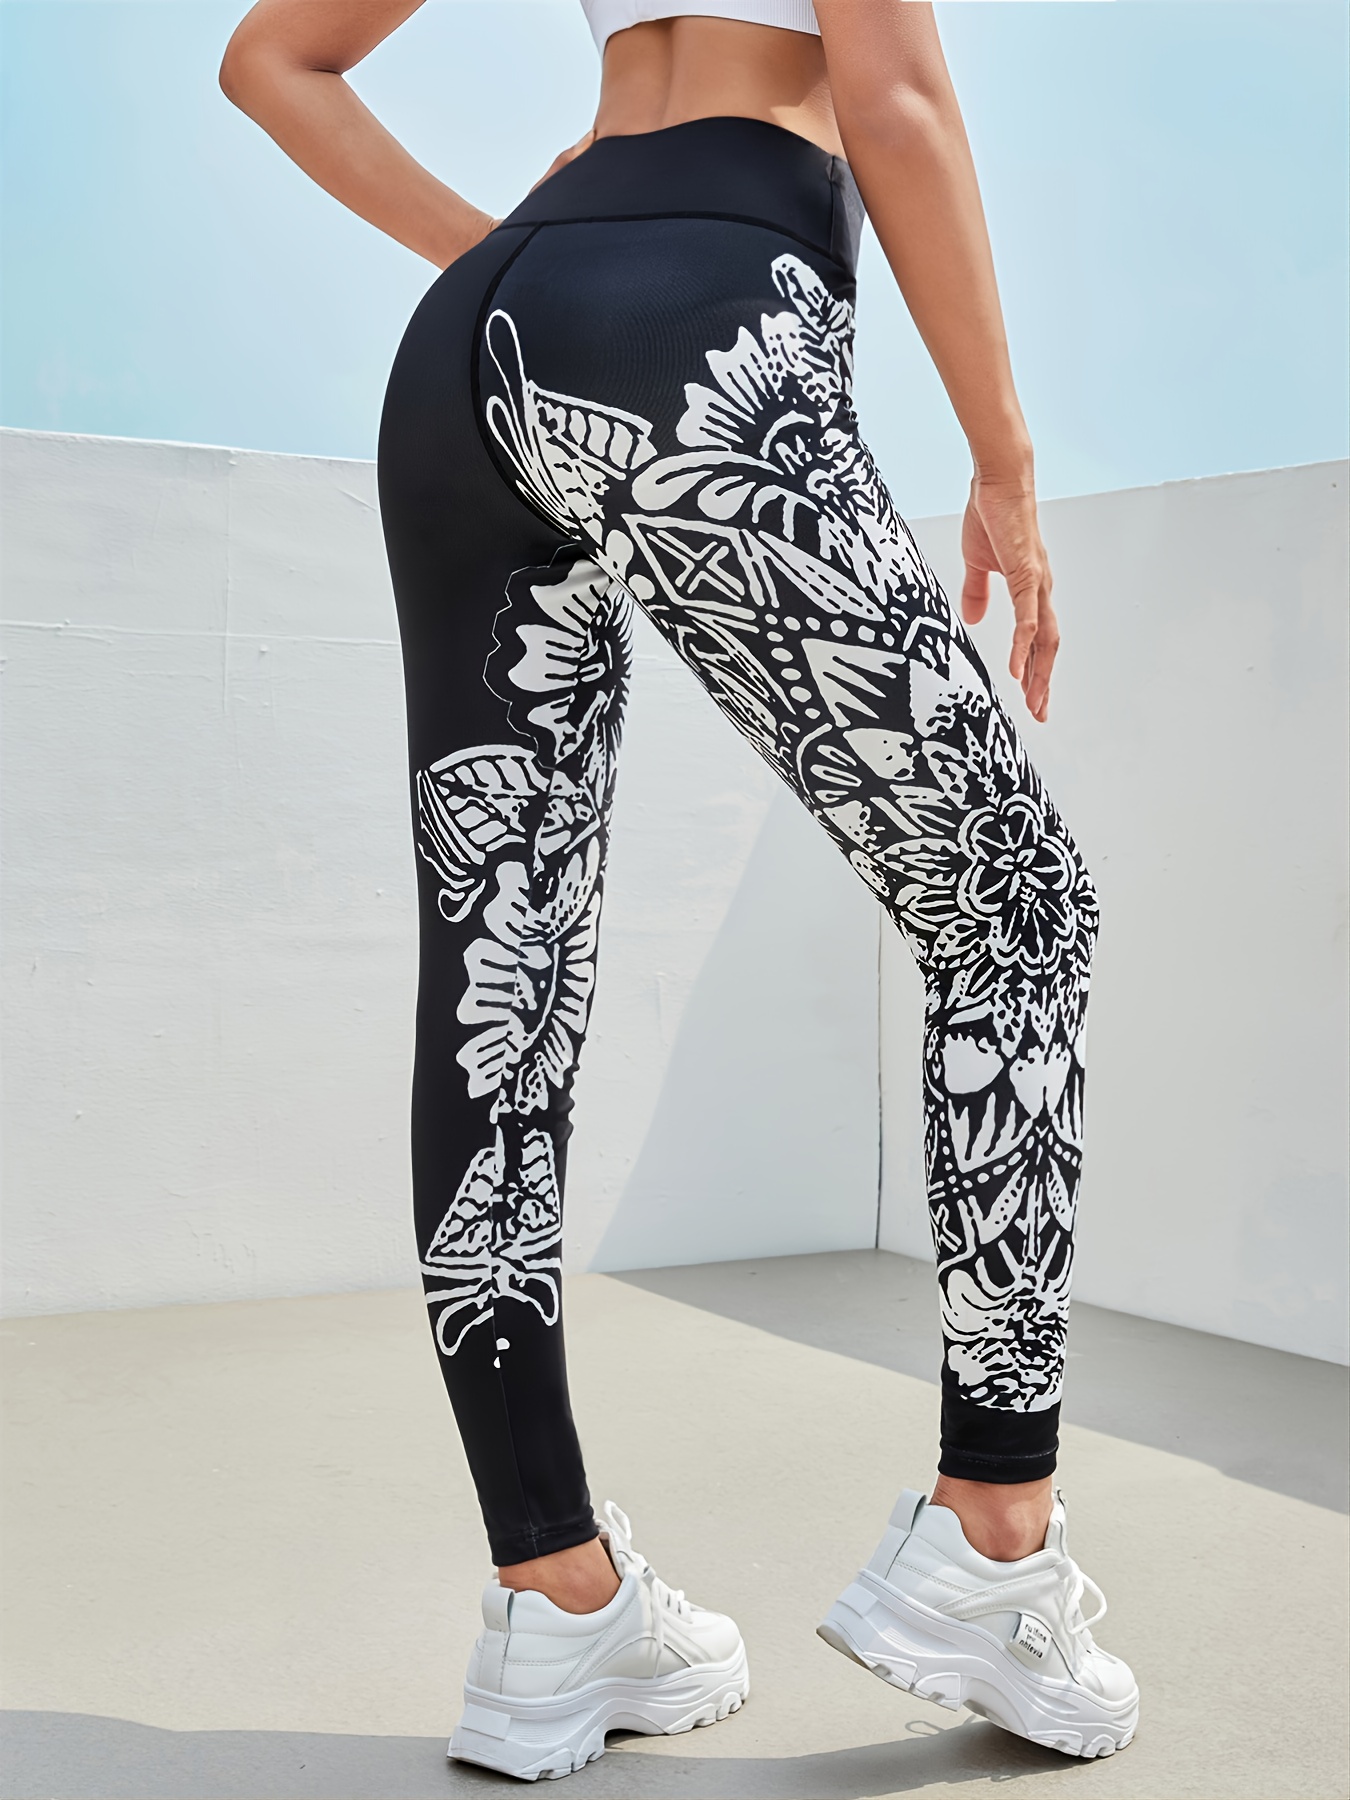 High Stretch Digital Printing Yoga Leggings for Women - Comfortable Fitness  Workout Pants with Moisture-Wicking Technology